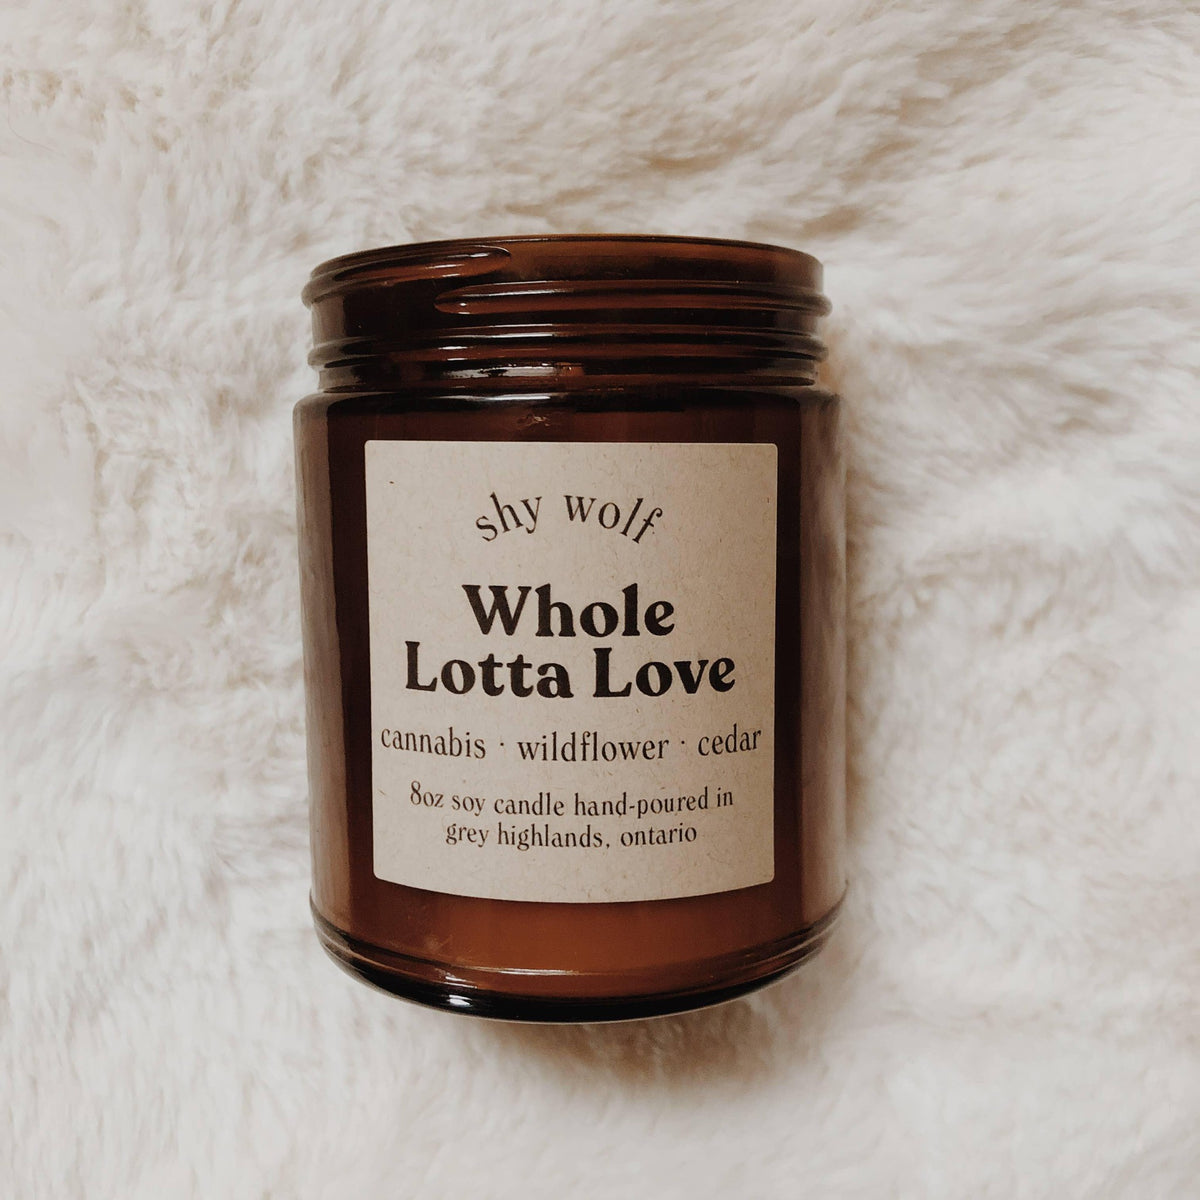 Shy Wolf Candles&#39; Whole Lotta Love - Rock and Roll Candle.